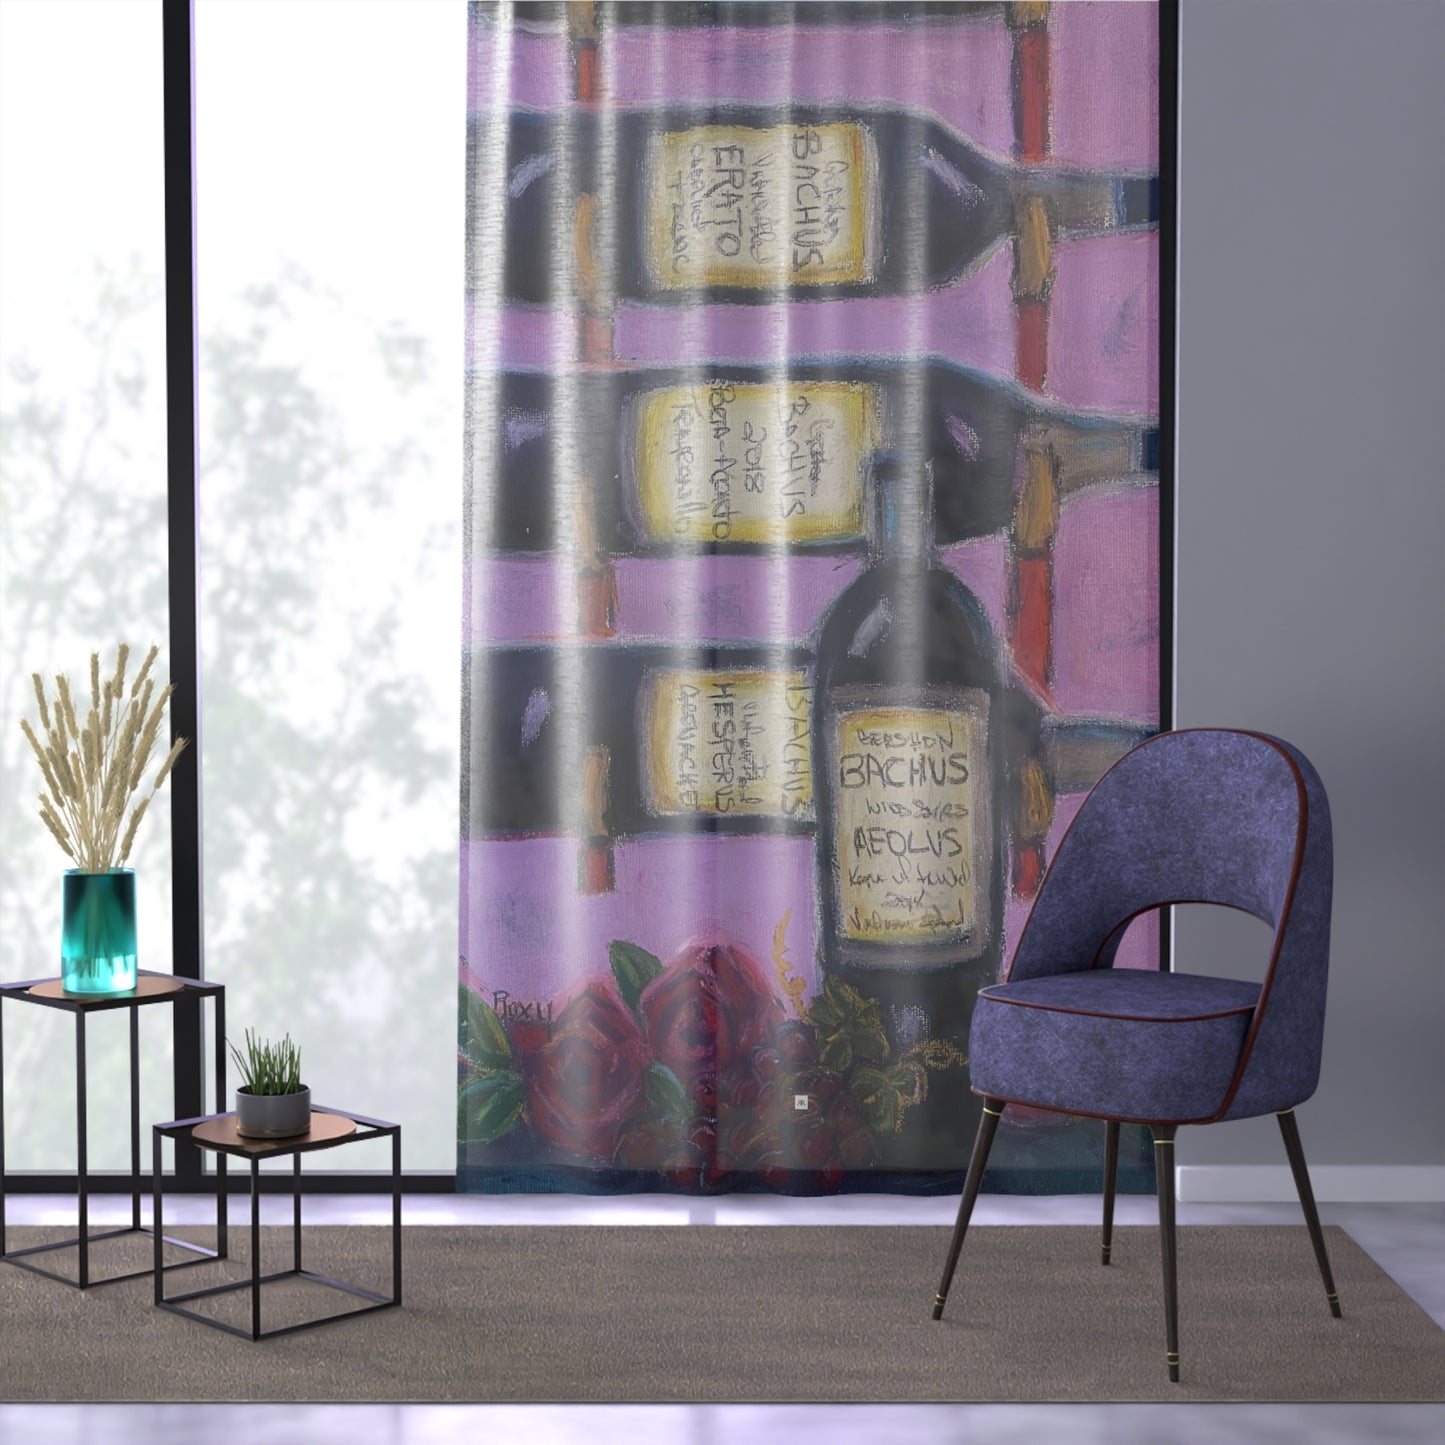 Bachus Reserves GBV Wine Rack & Roses on 84 x 50 inch Sheer Window Curtain